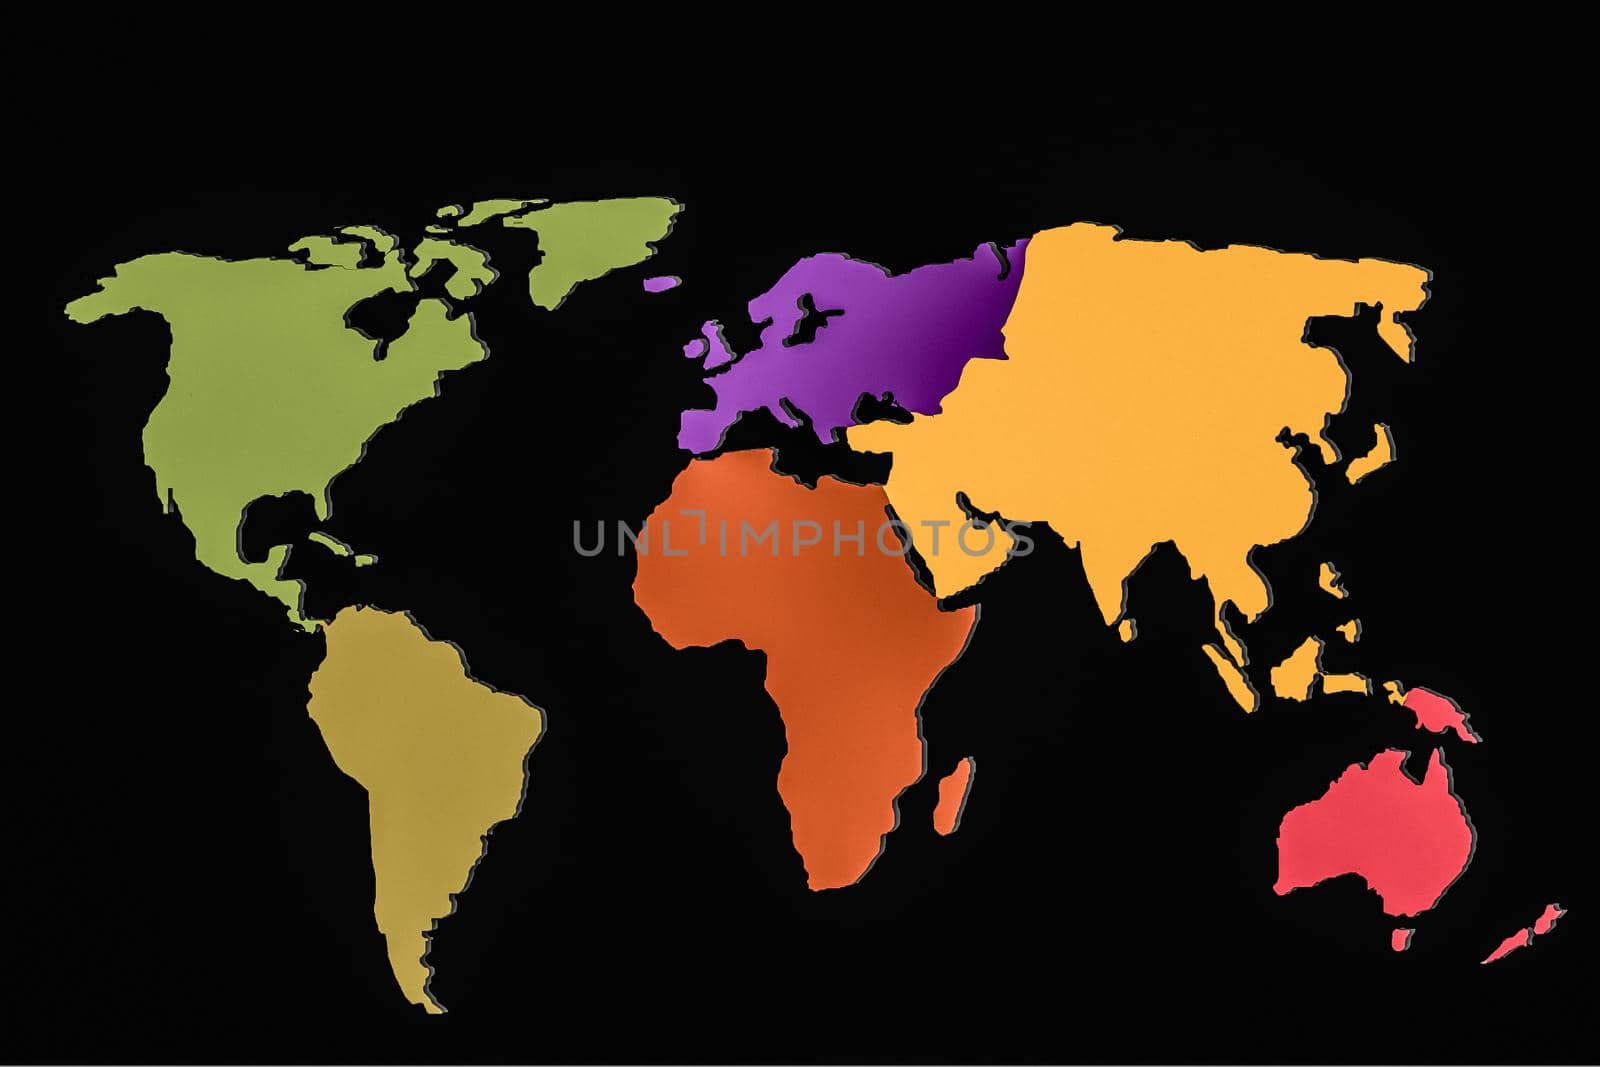 Roughly sketched out world map as global business concepts by berkay